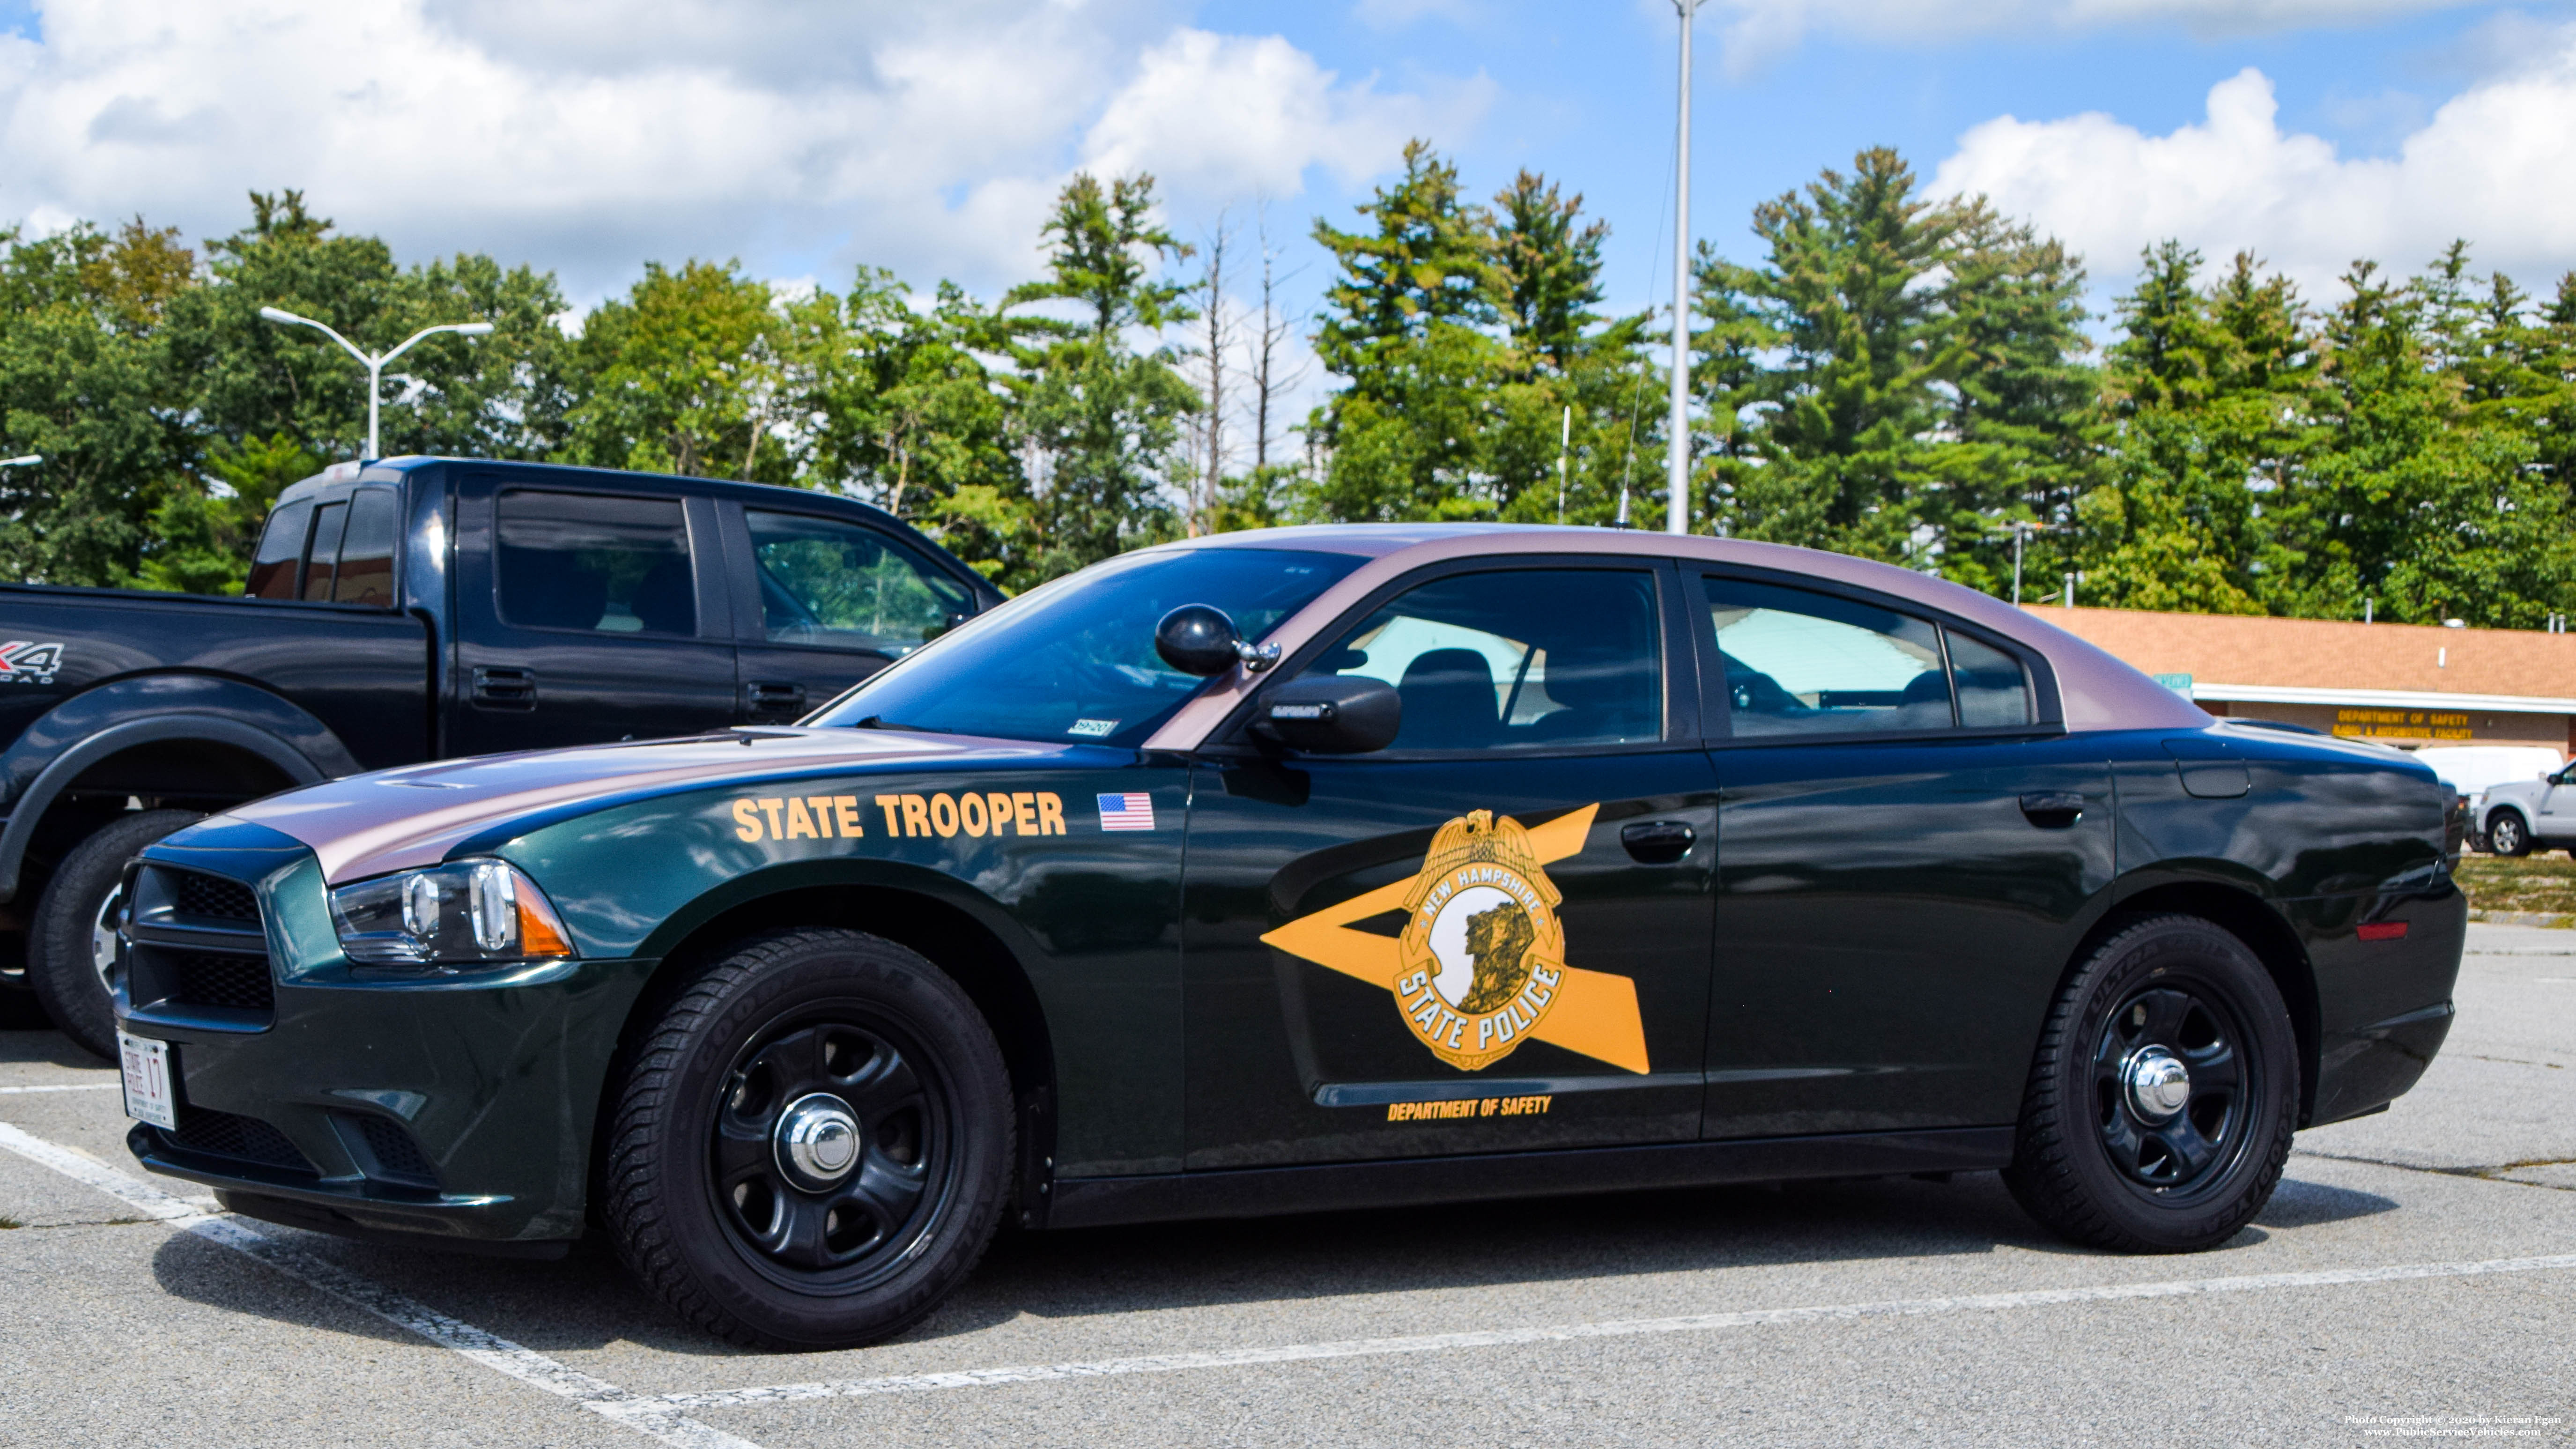 A photo  of New Hampshire State Police
            Cruiser 17, a 2011-2014 Dodge Charger             taken by Kieran Egan